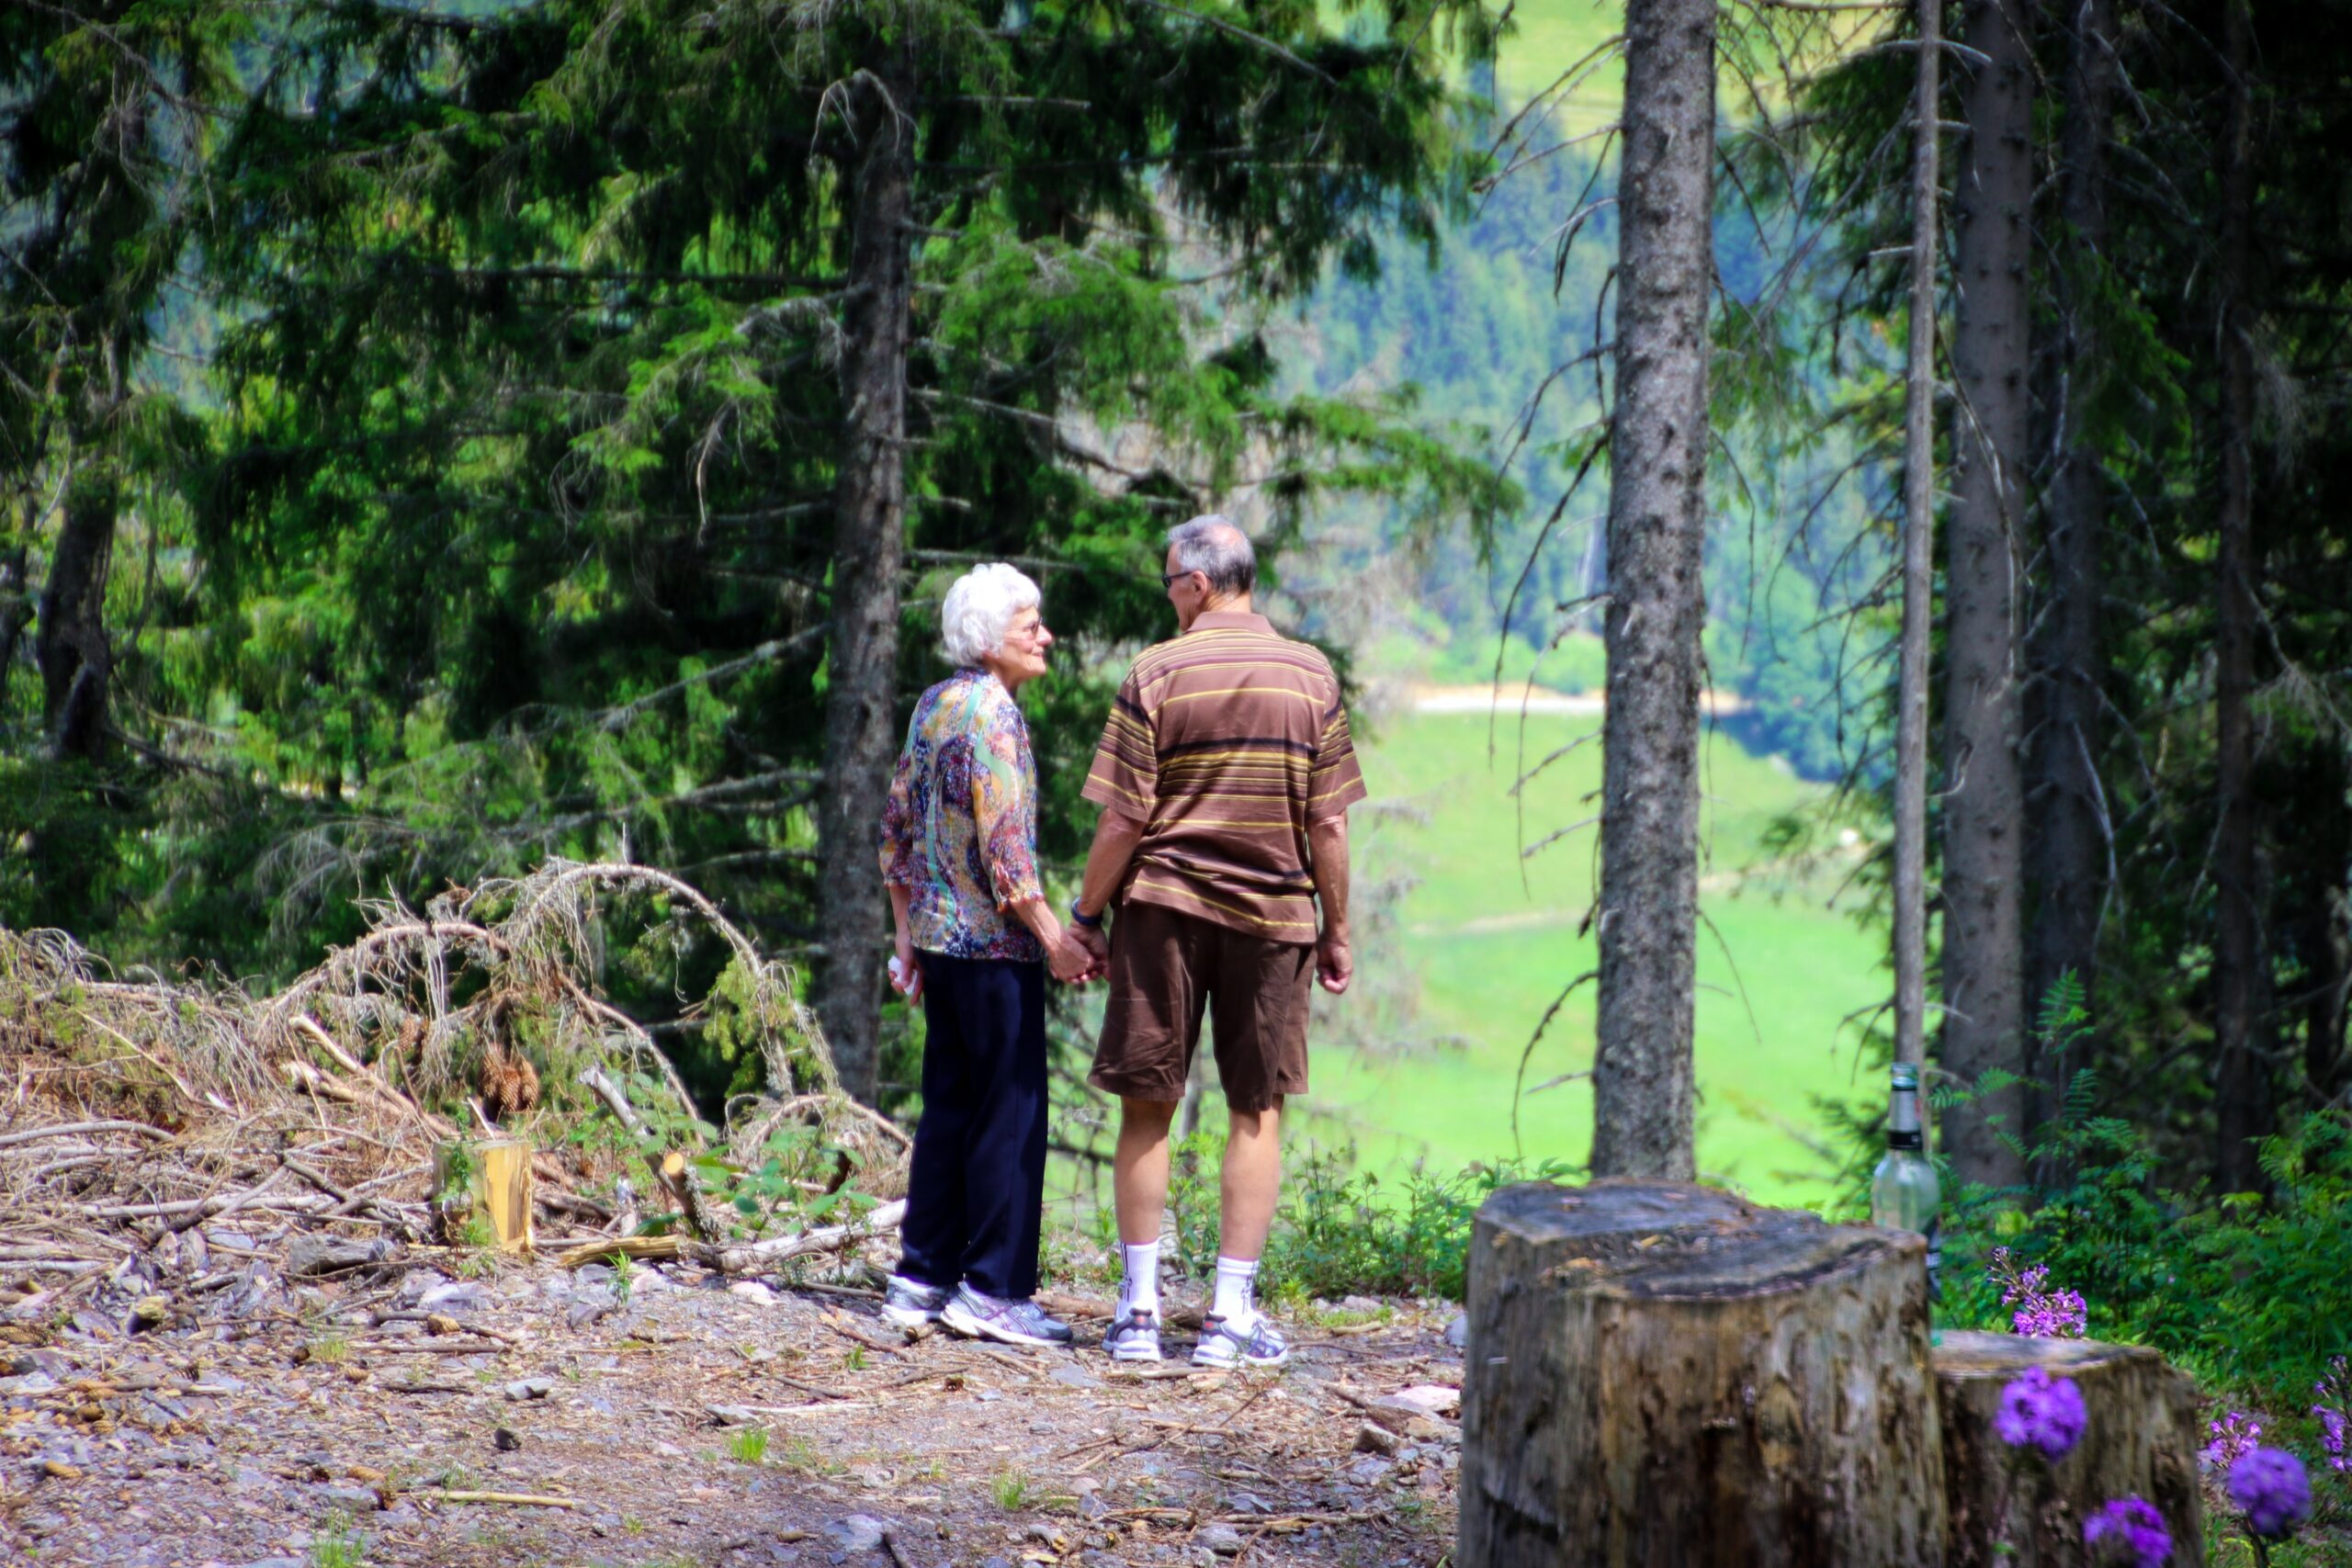 An older couple enjoying a leisurely stroll through a peaceful forest on one of their Sunshine Coast day trips.